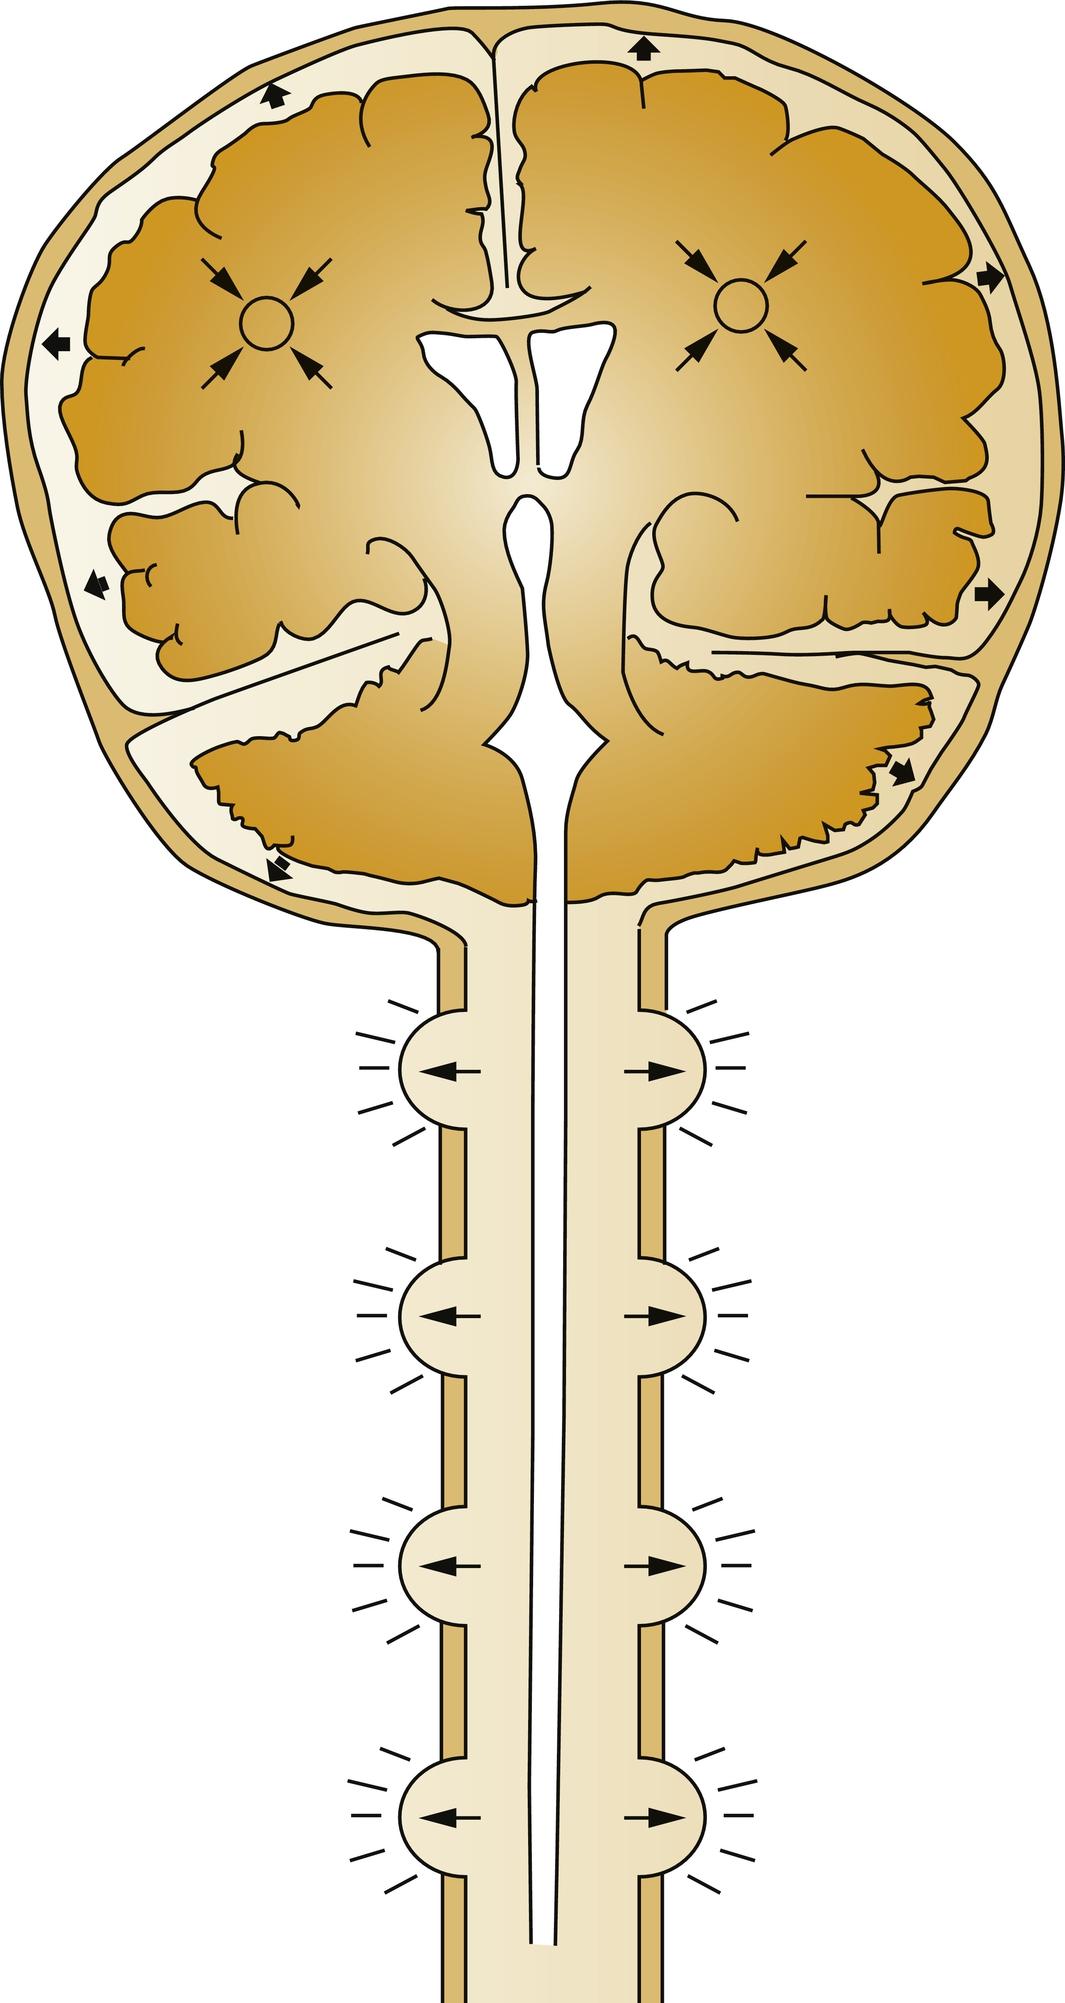 Fig. 24.1, The brain, spinal cord, and blood are encased in the skull and vertebral canal, thus constituting a nearly incompressible system. System capacitance is thought to be provided via intervertebral spaces.